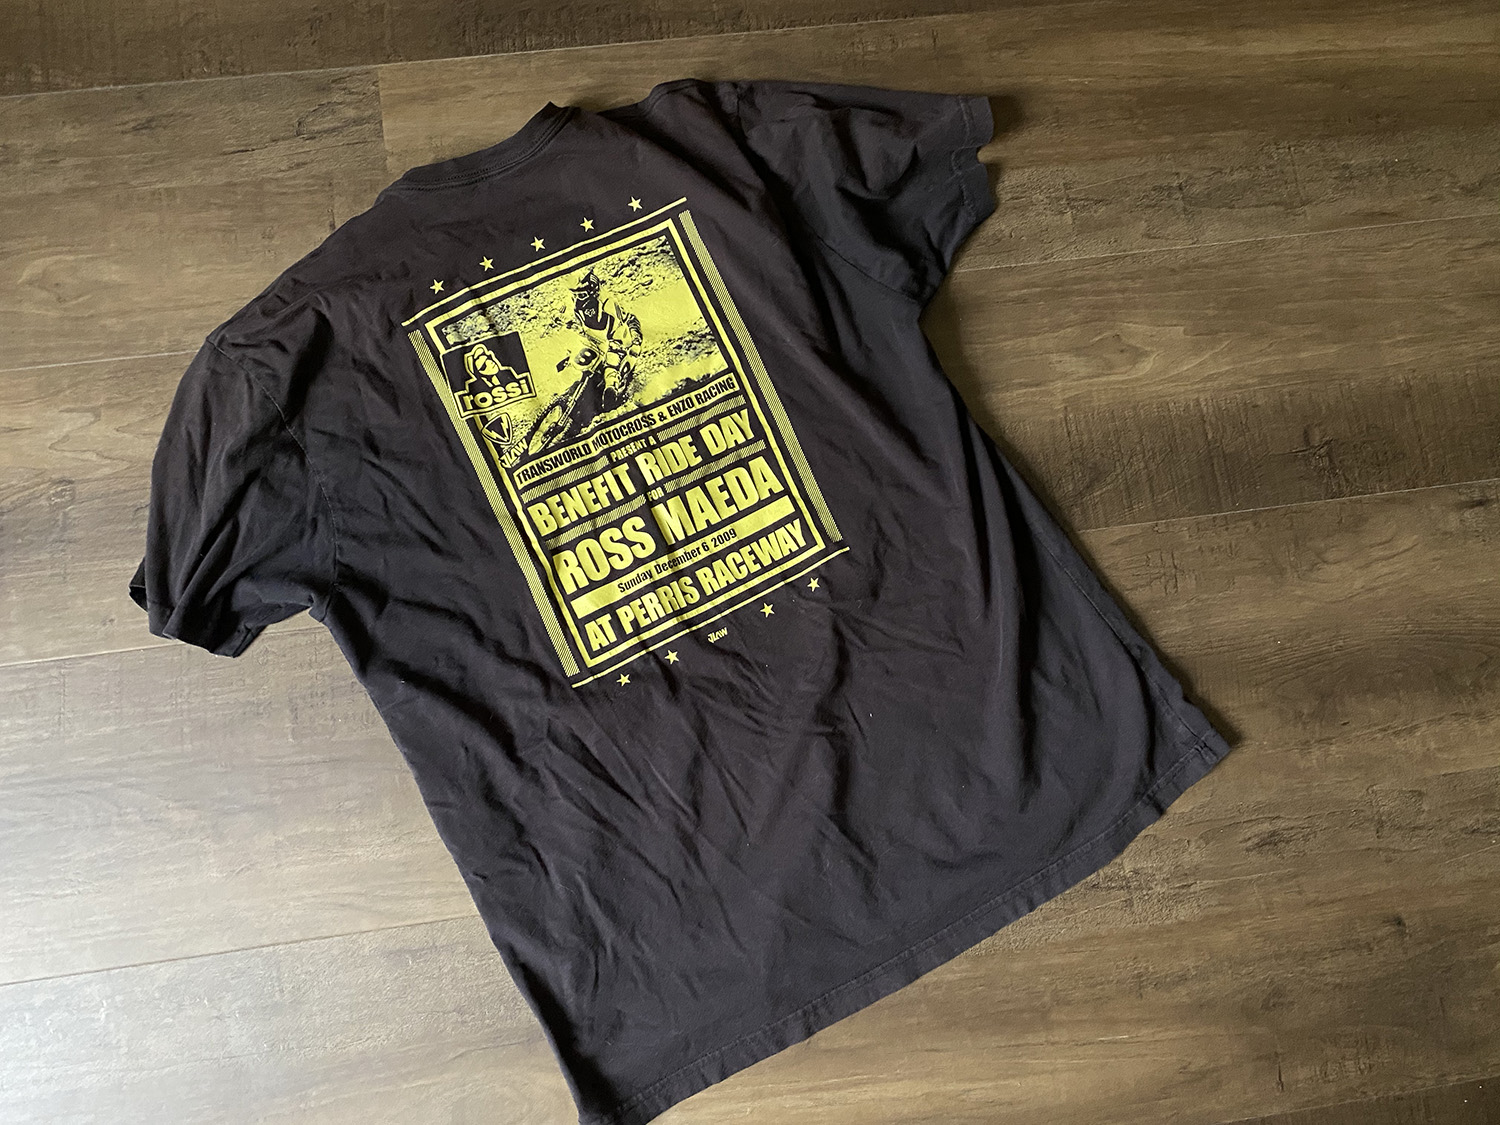 JLaw Rossi Ride Day T-Shirt | Garage Finds - Swapmoto Live